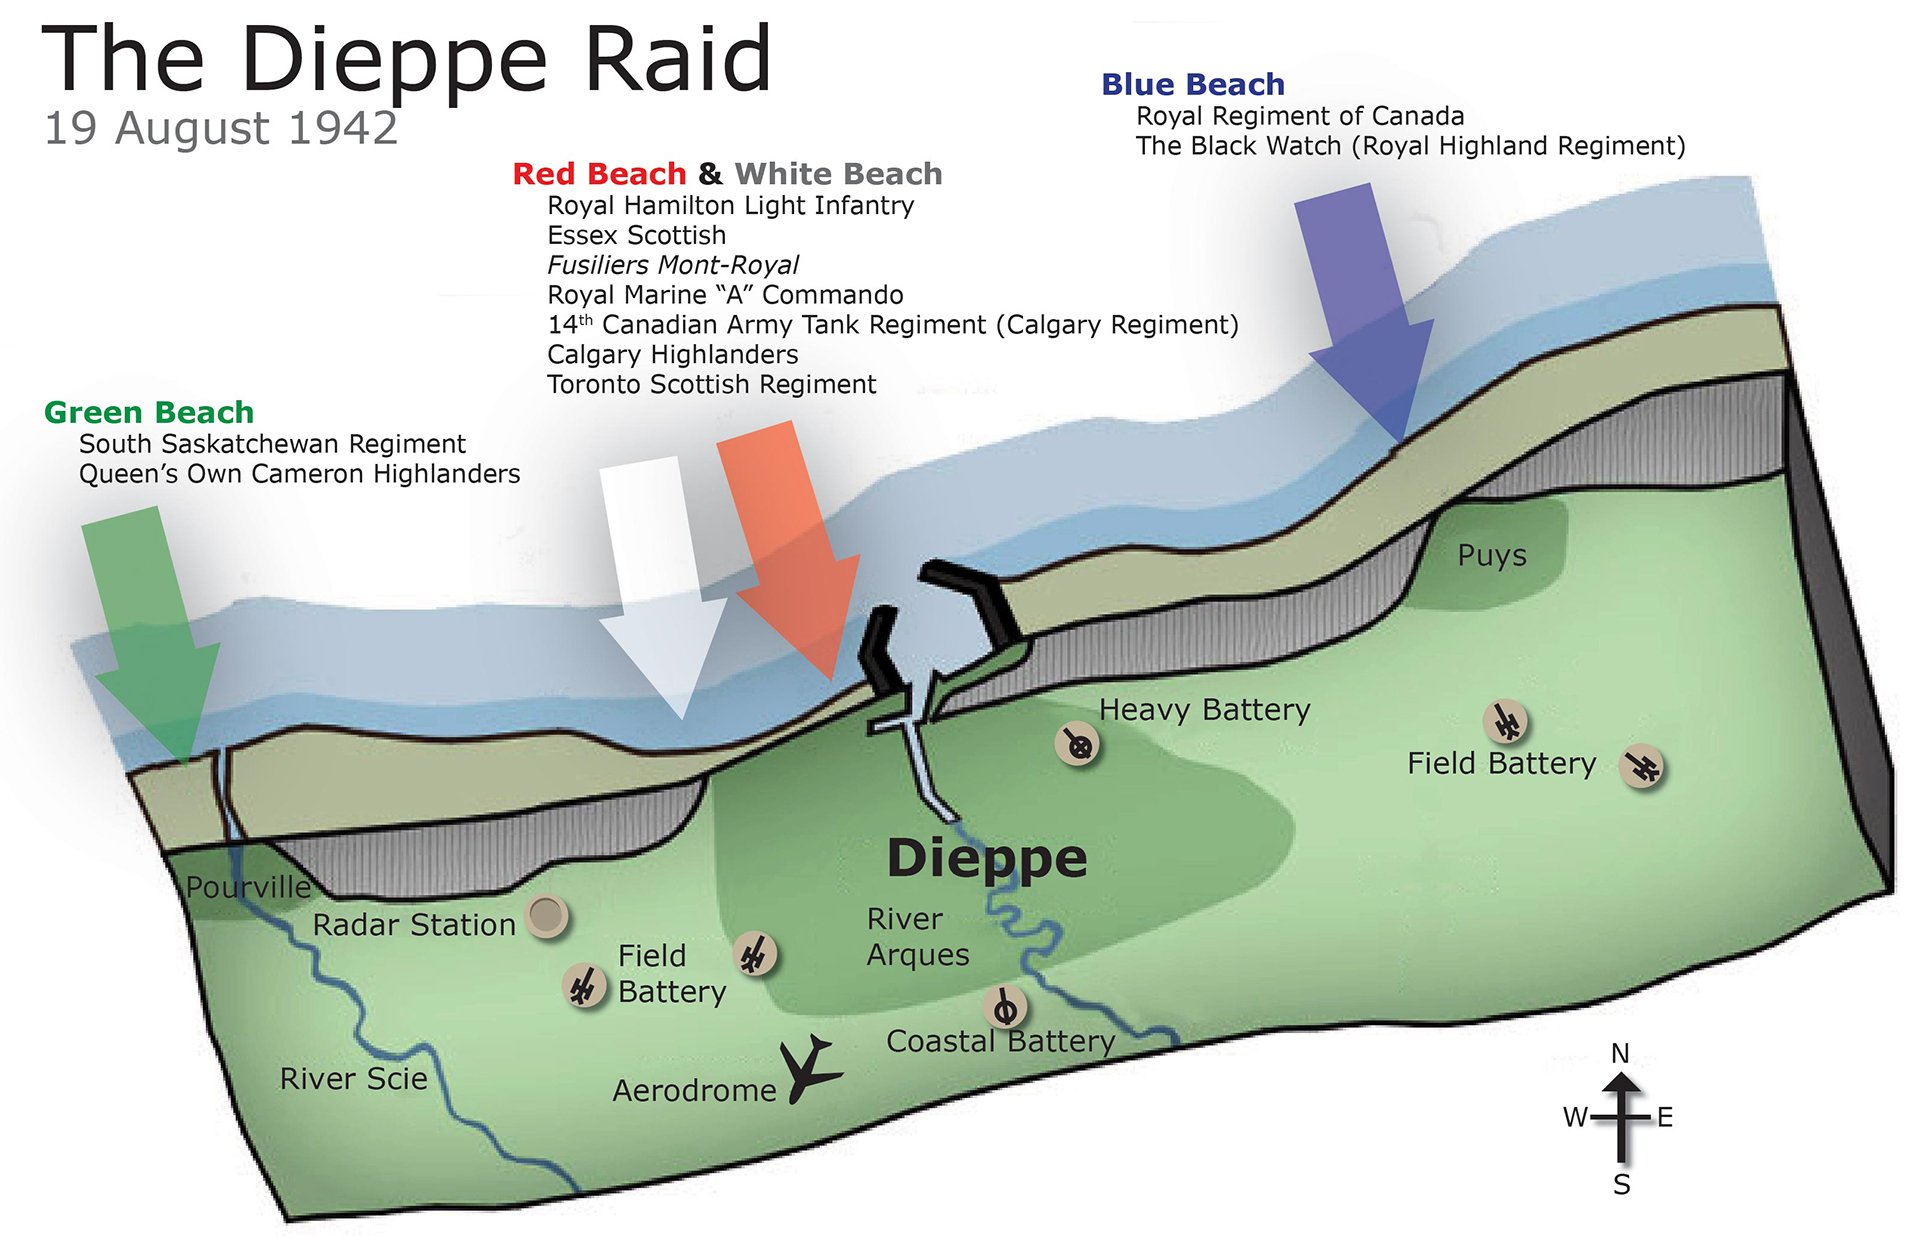 Illustrated map of the Dieppe Raid from 19 August 1942 depicting various landing zones including Red Beach, White Beach, Green Beach, and Blue Beach, with assignments of Canadian and British regiments. Key locations like Dieppe town, River Scie, aerodrome, radar station, and German defensive positions including heavy and field batteries are marked.